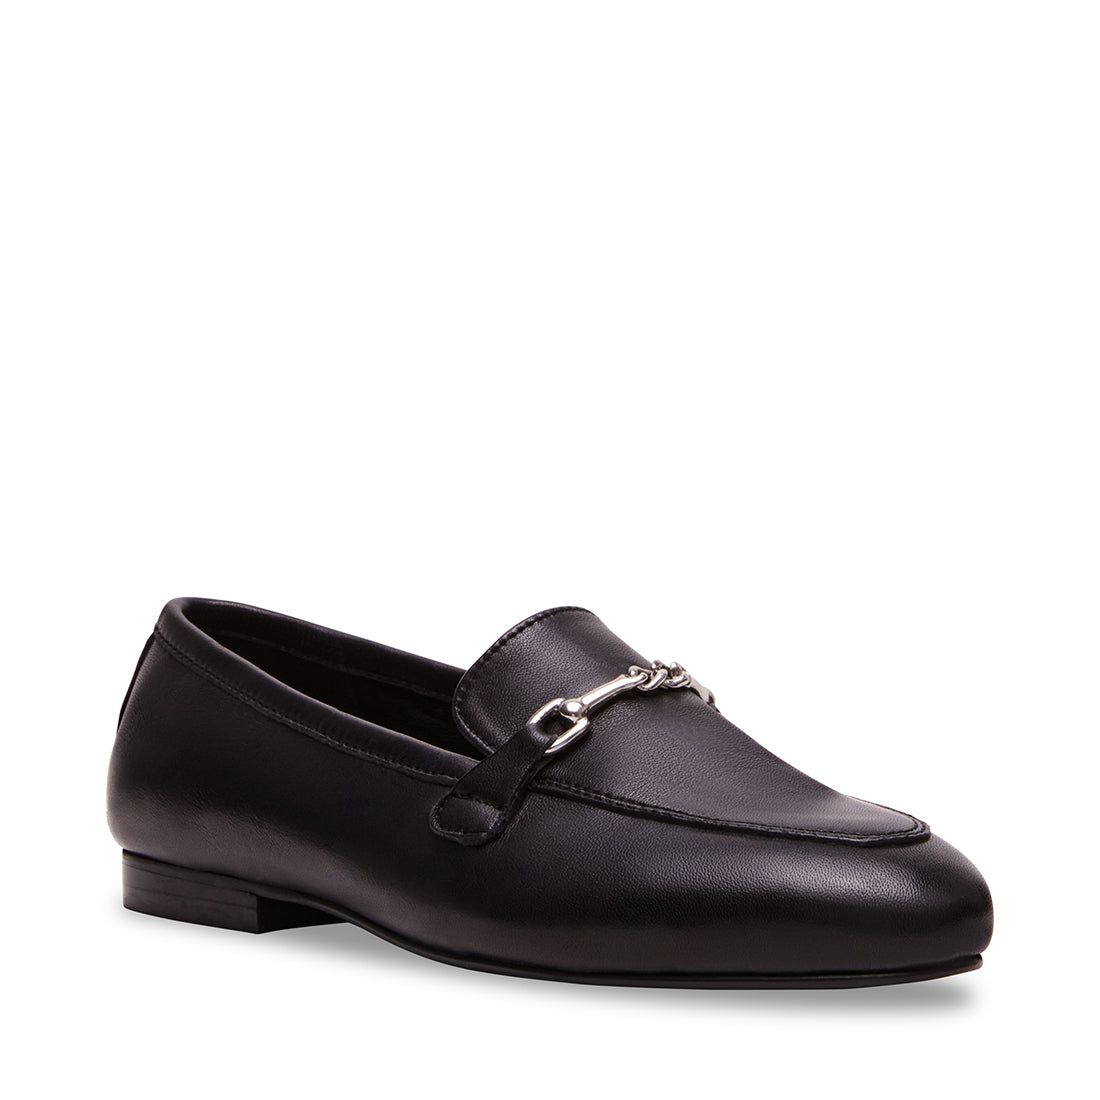 Catareena Loafer Black Leather- Hover Image